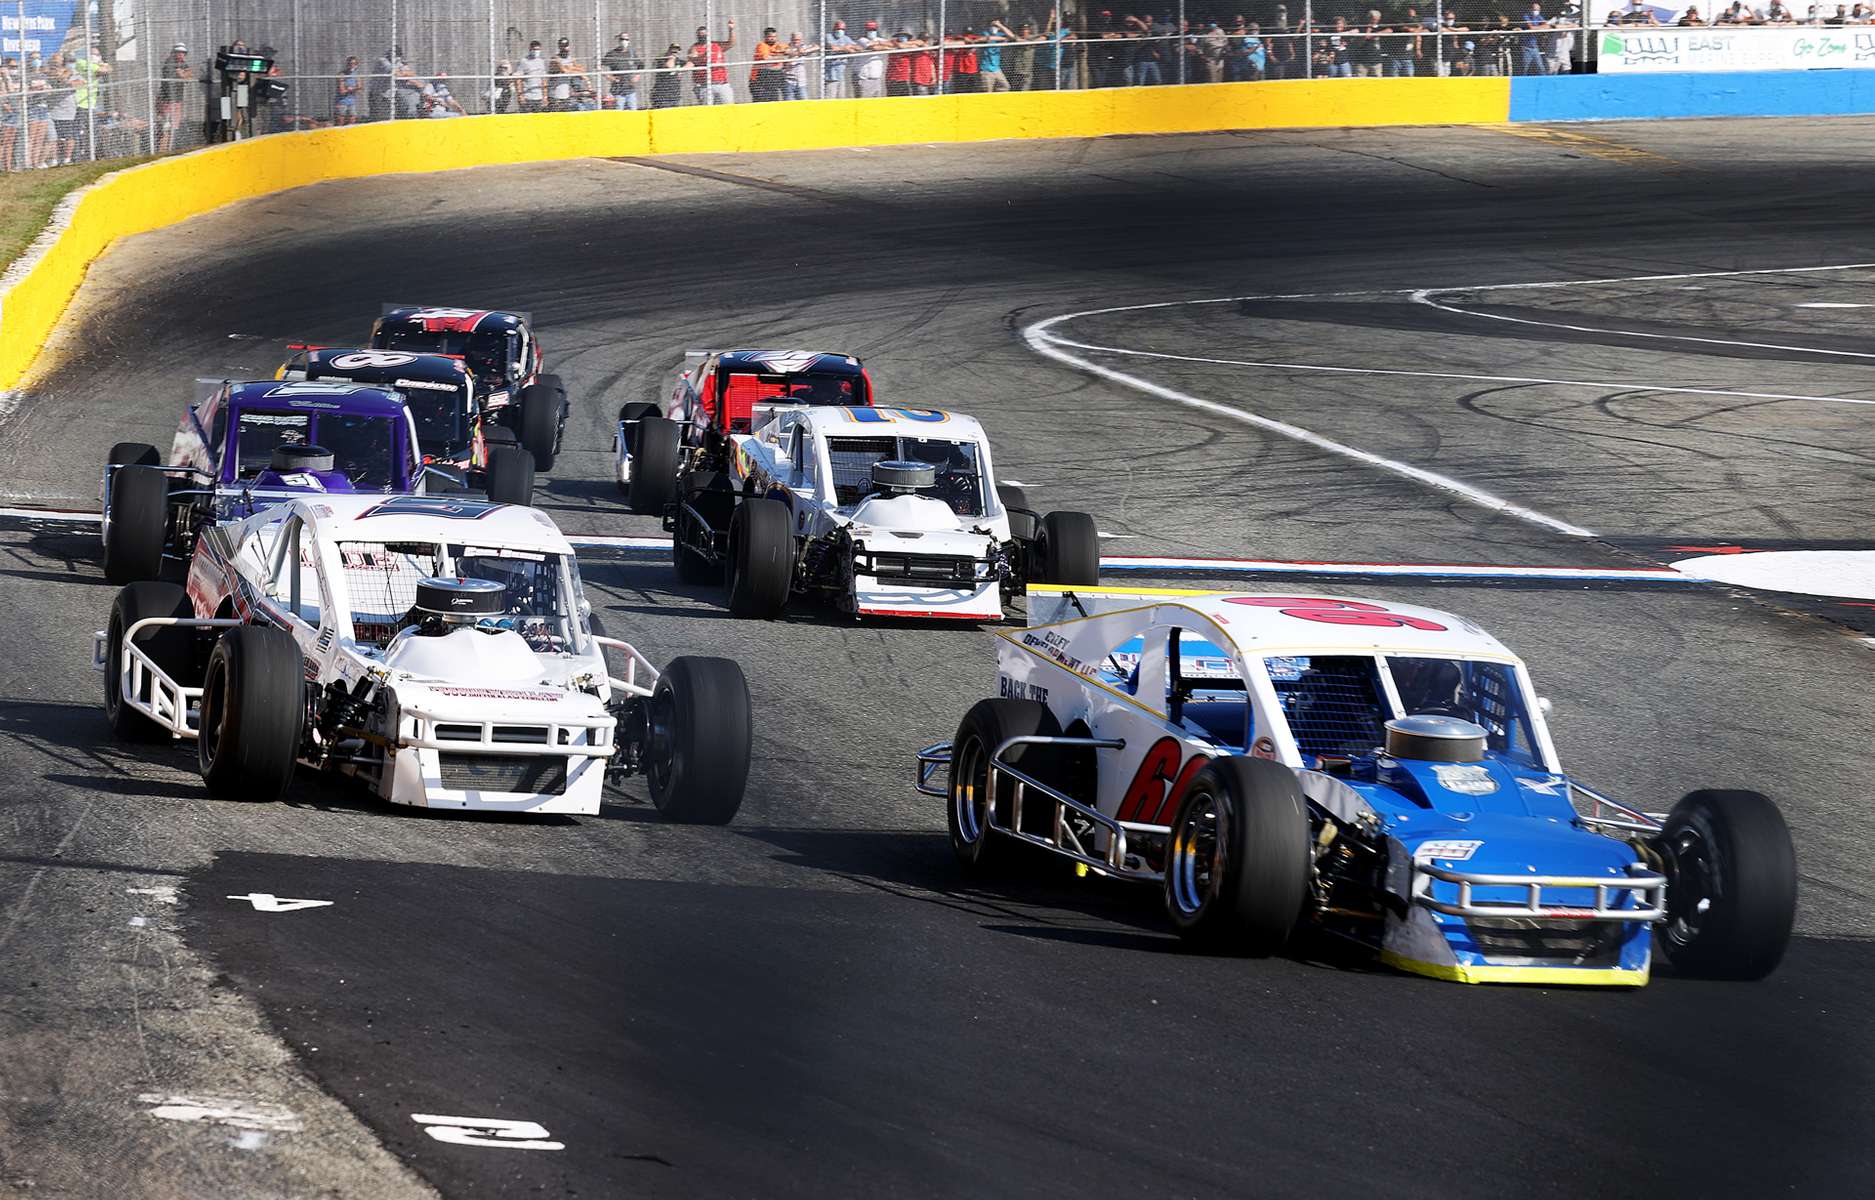 Cars race around the track during NASCAR Advance Auto Series Opening Night at Riverhead Raceway on August 01, 2020 in Riverhead, New York.  The race track had been closed due to the coronavirus COVID-19 pandemic.  More than 4,585,258 people in the United States alone have been infected with the coronavirus and at least 154,000 have died.  